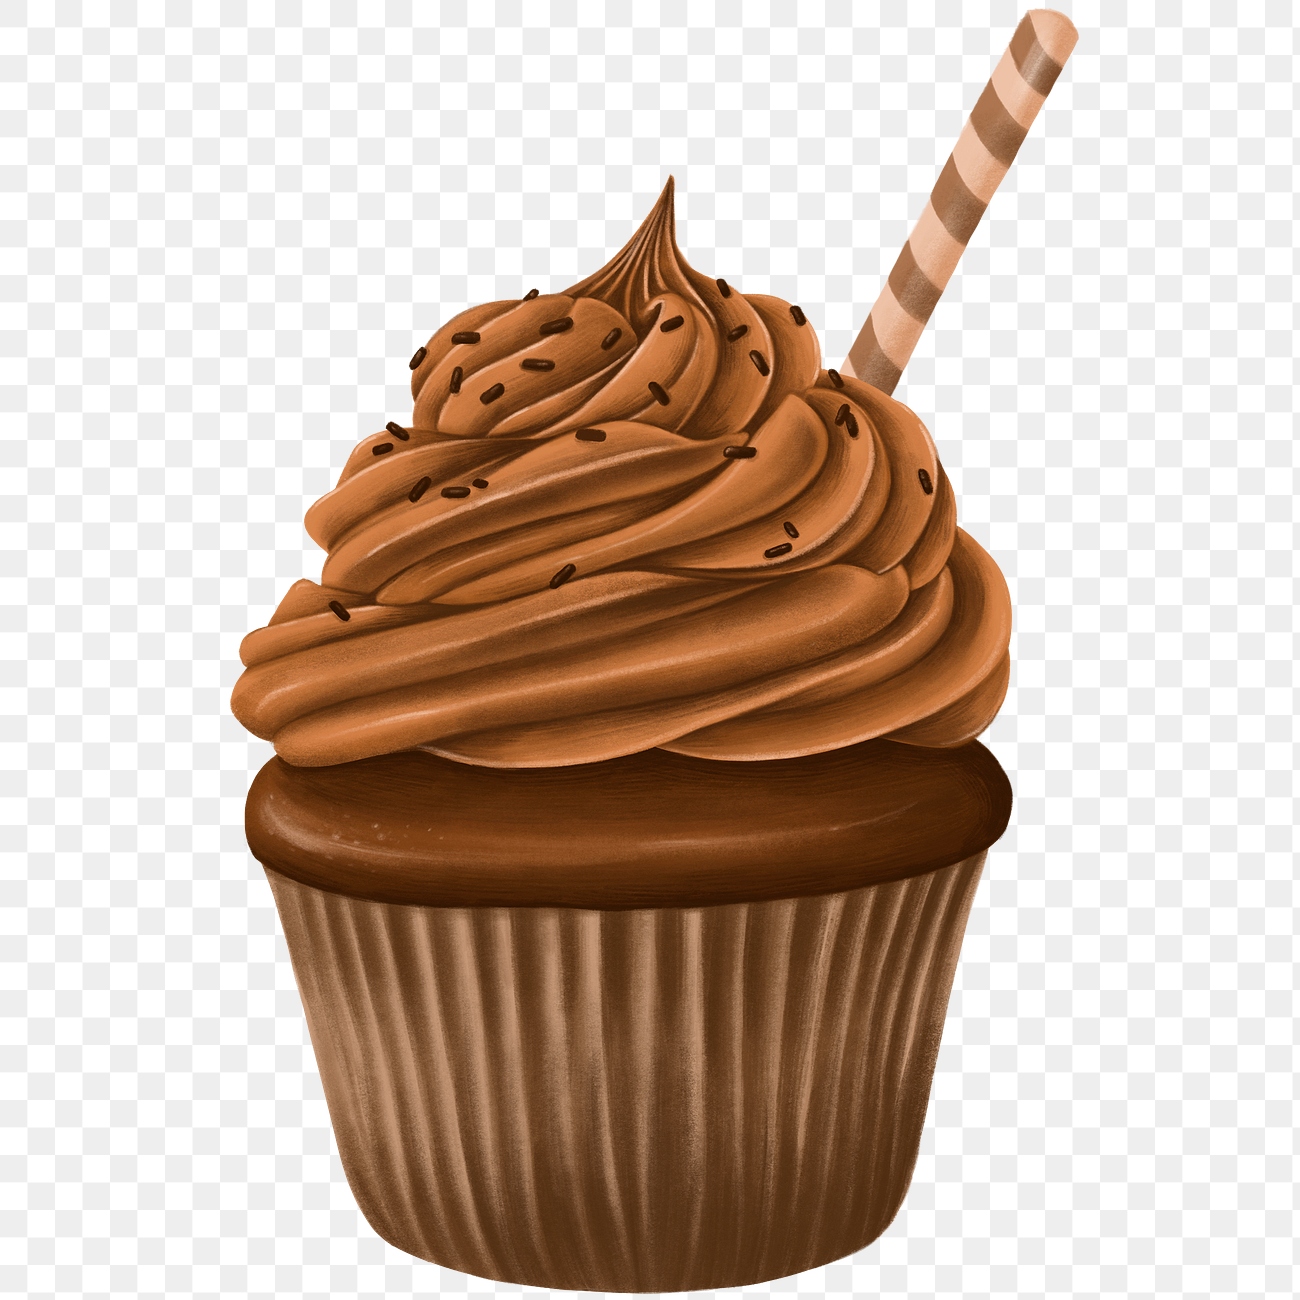 Delicious cupcake drawing png